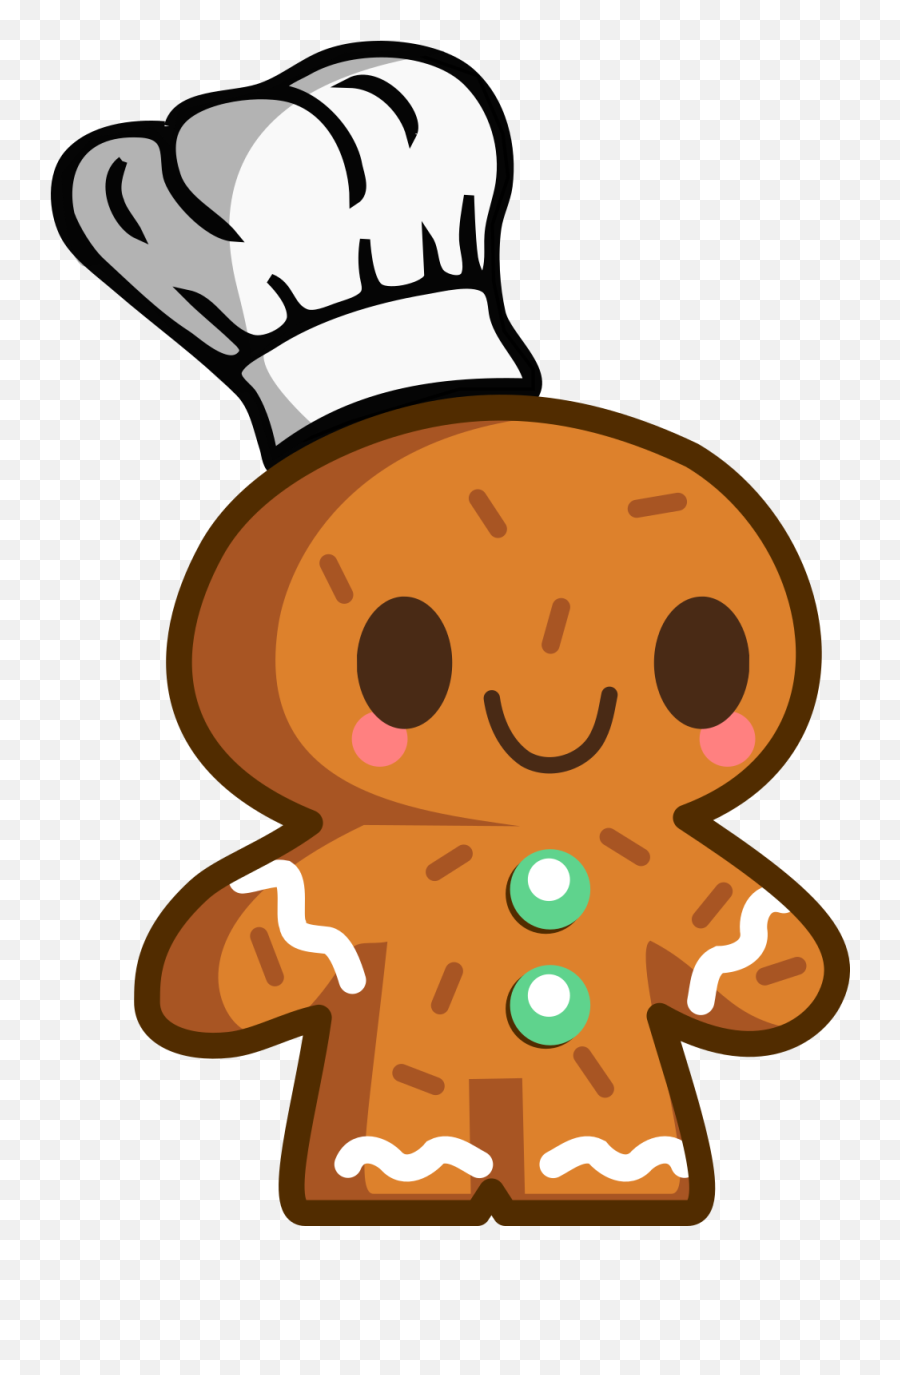 Whisk Vector - Merry Christmas Gingerbread Man Clipart Gingerbread Man Clipart Png Emoji,Gingerbread Man Clipart